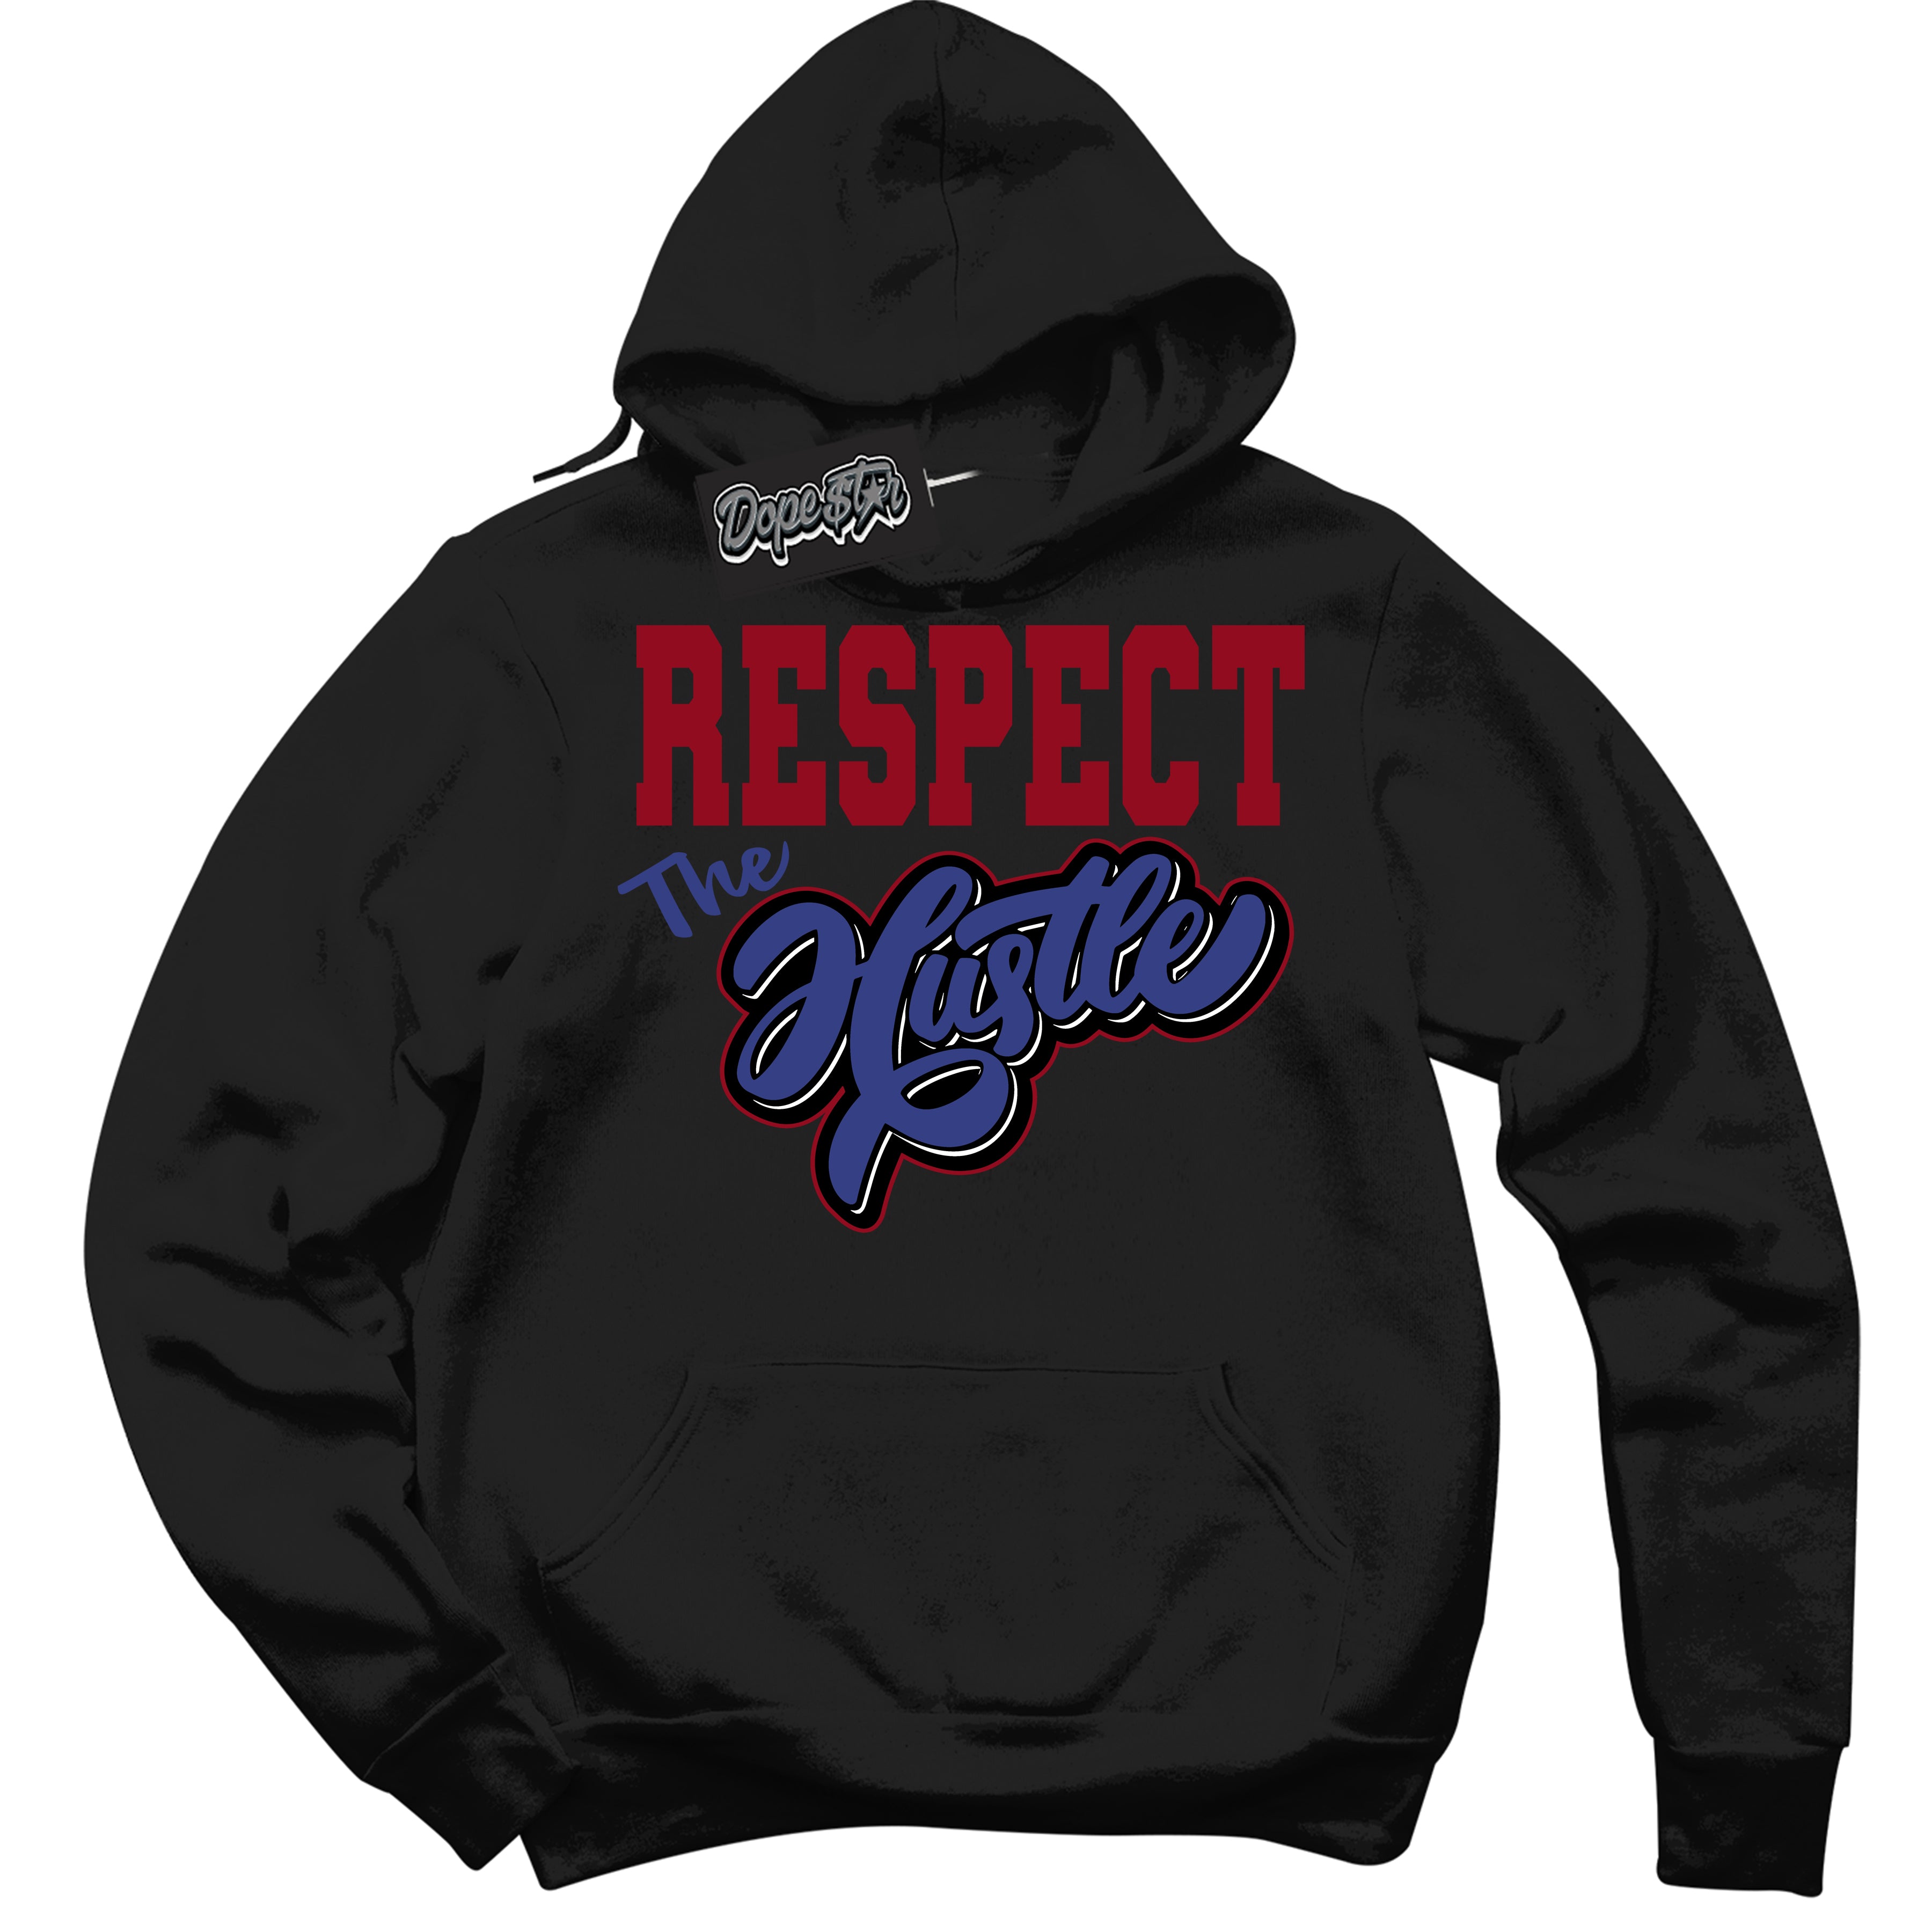 Cool Black Hoodie with “ Respect The Hustle ”  design that Perfectly Matches Playoffs 8s Sneakers.